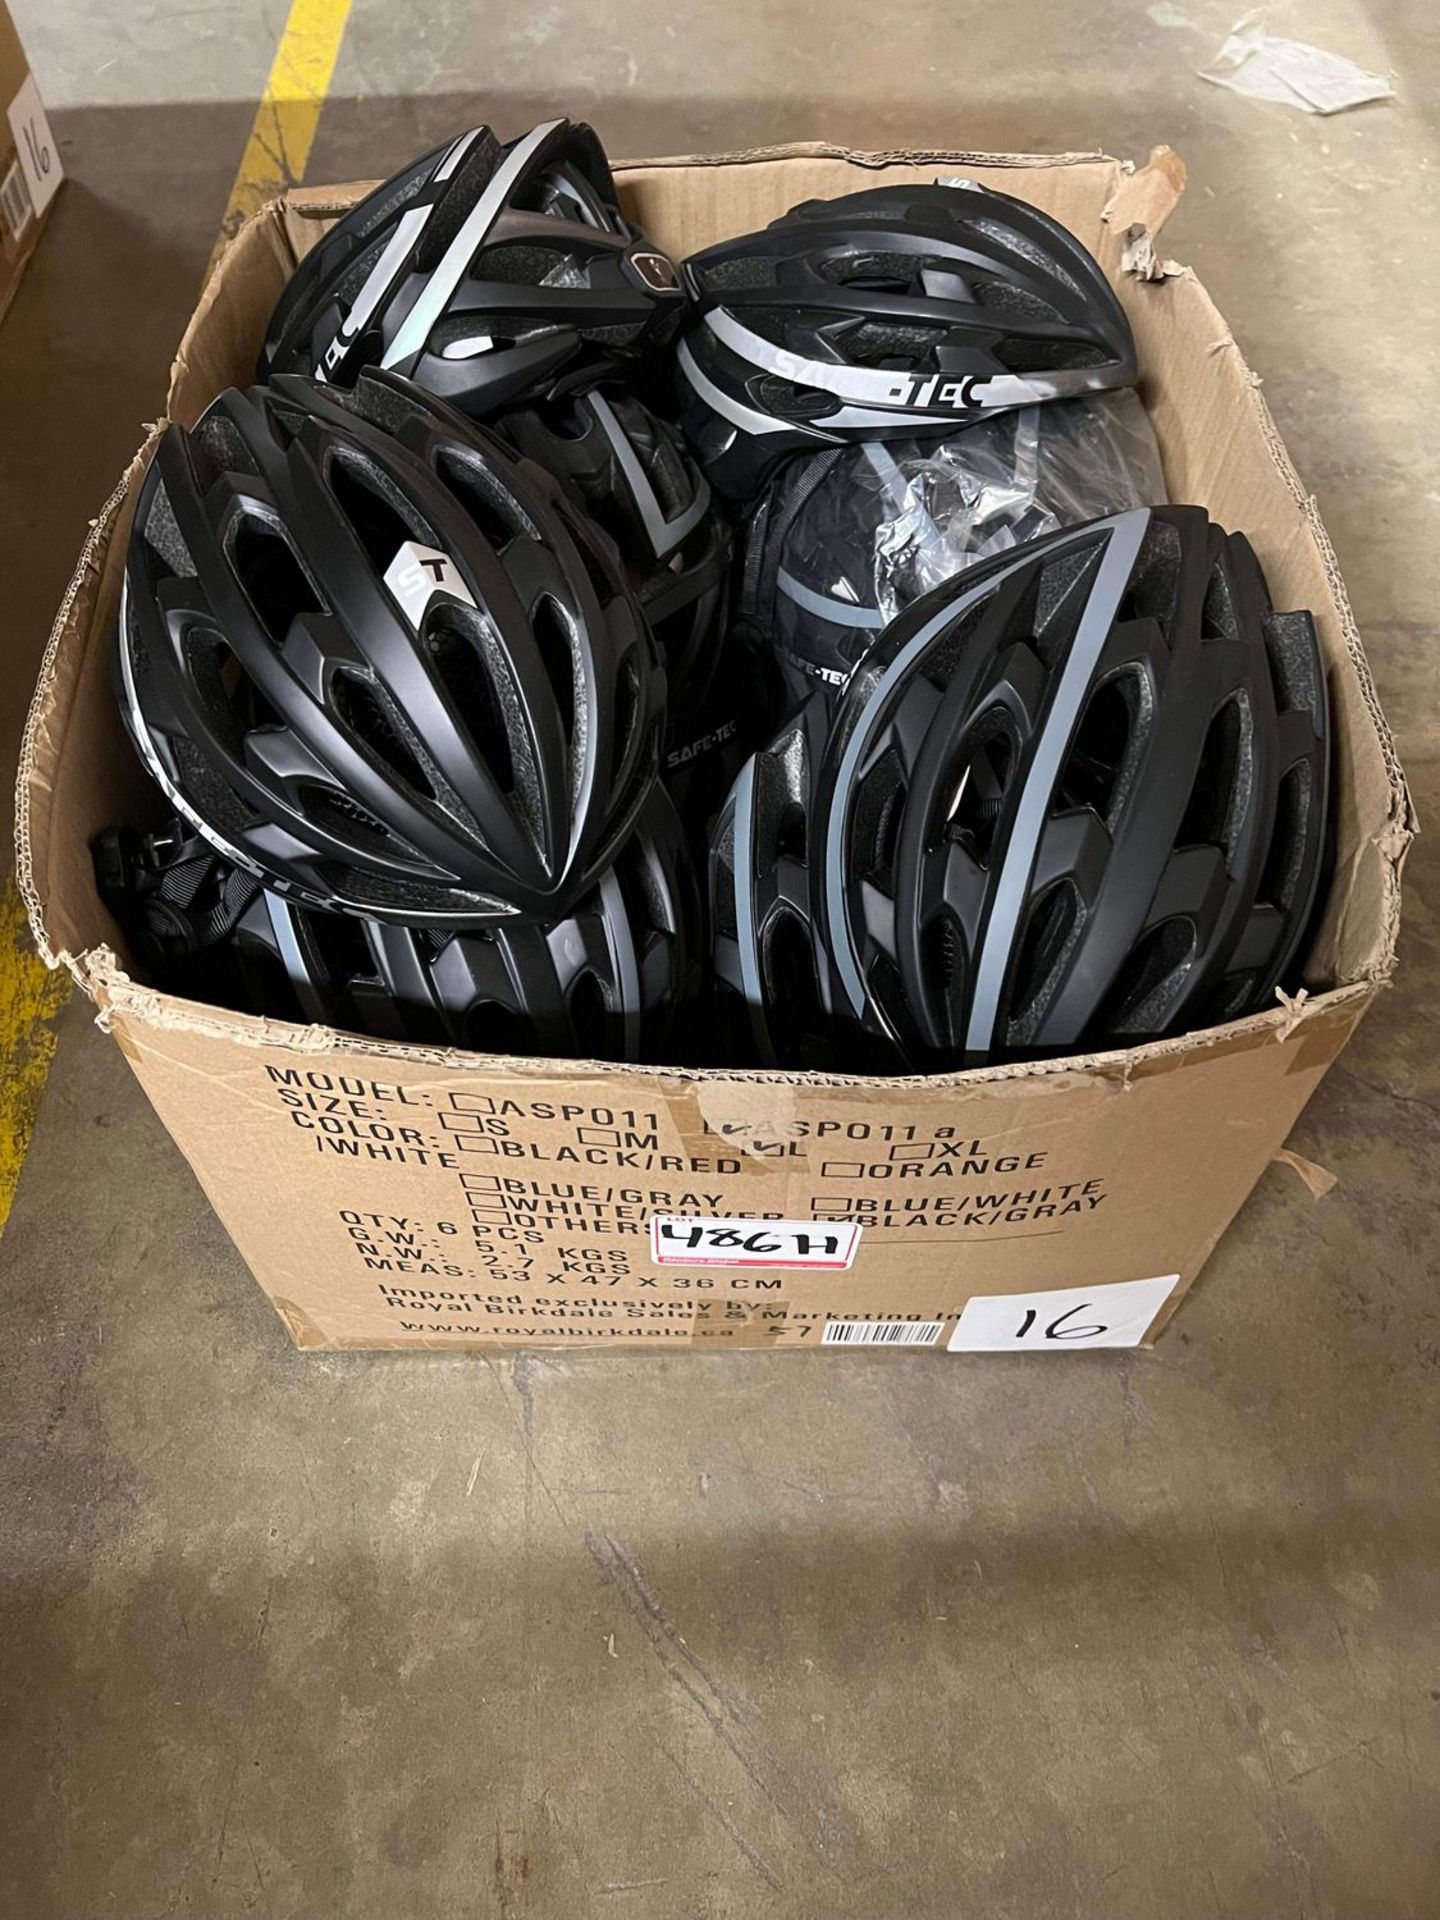 UNITS - SAFE-TEC ASSROTED SIZE BICYCLE HELMETS - BLACK